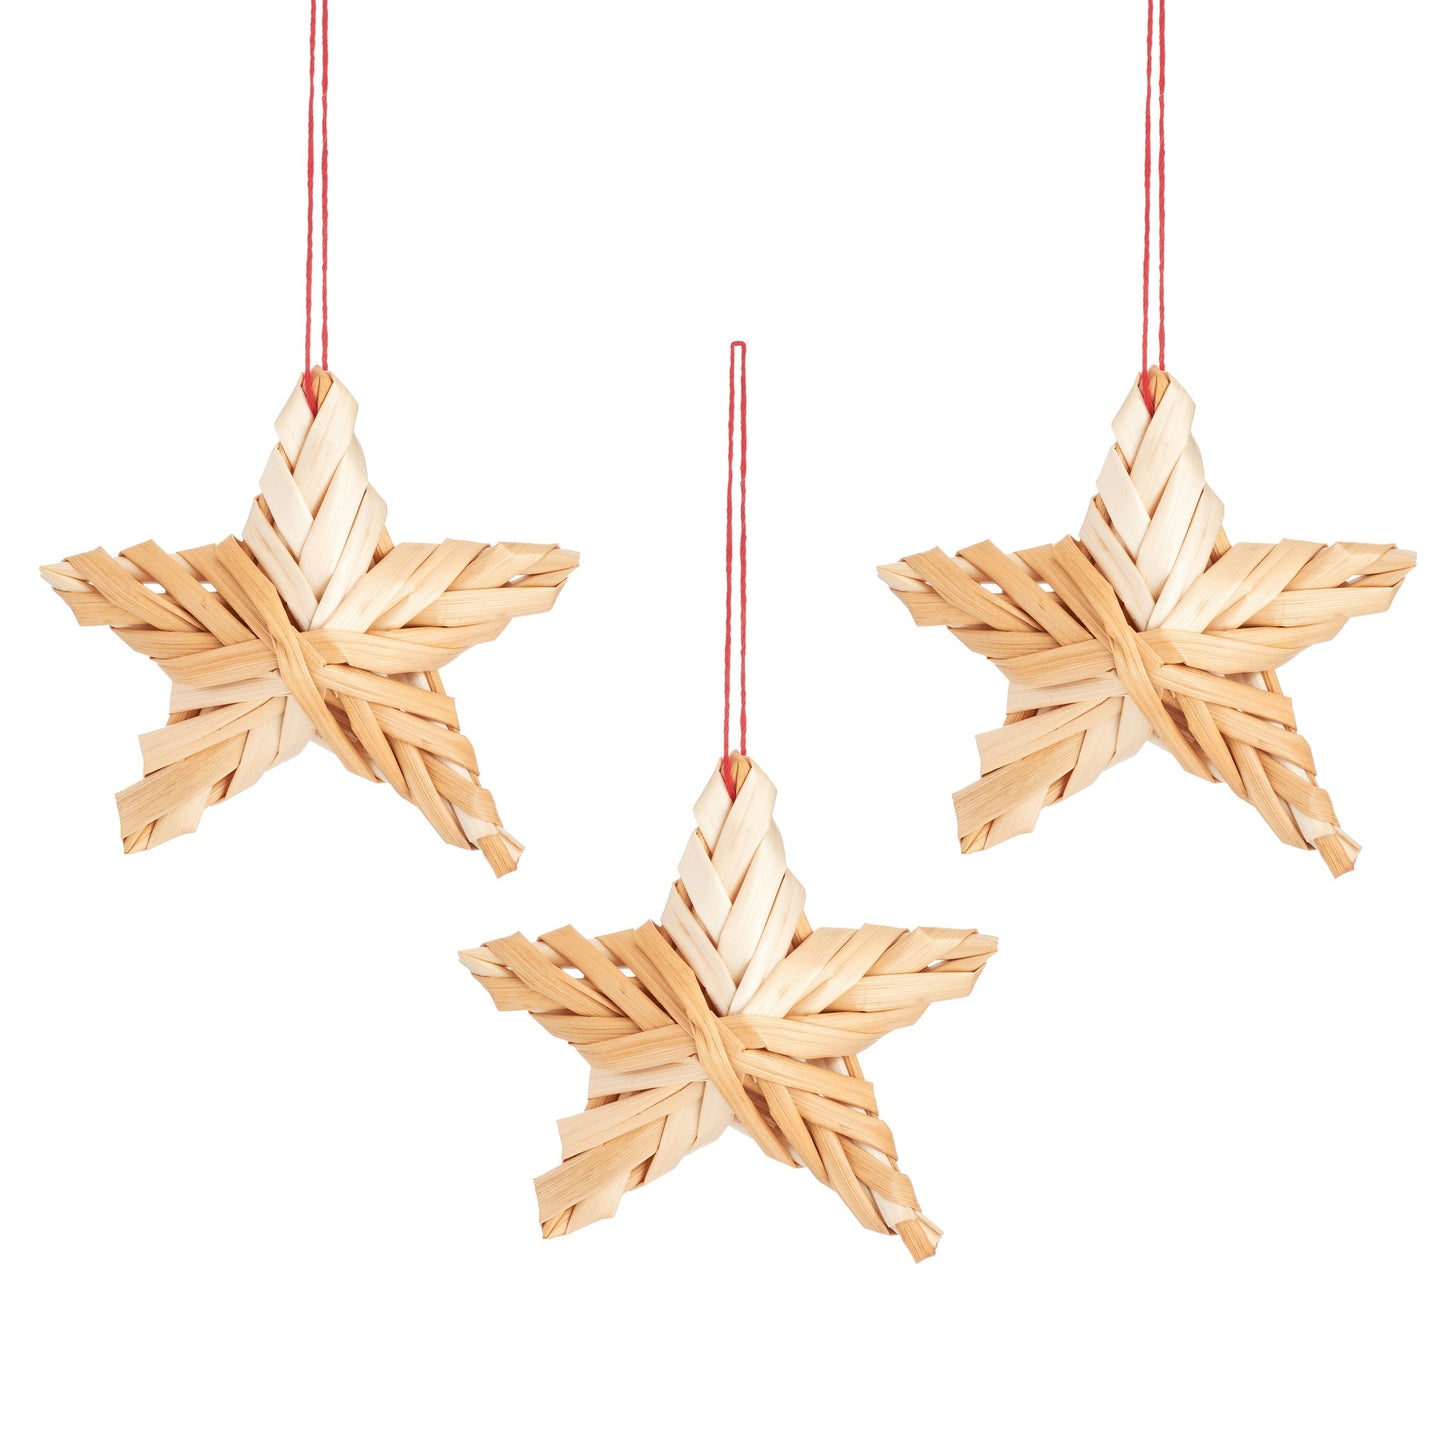 3 straw star hanging decorations on red string against a plain white background.